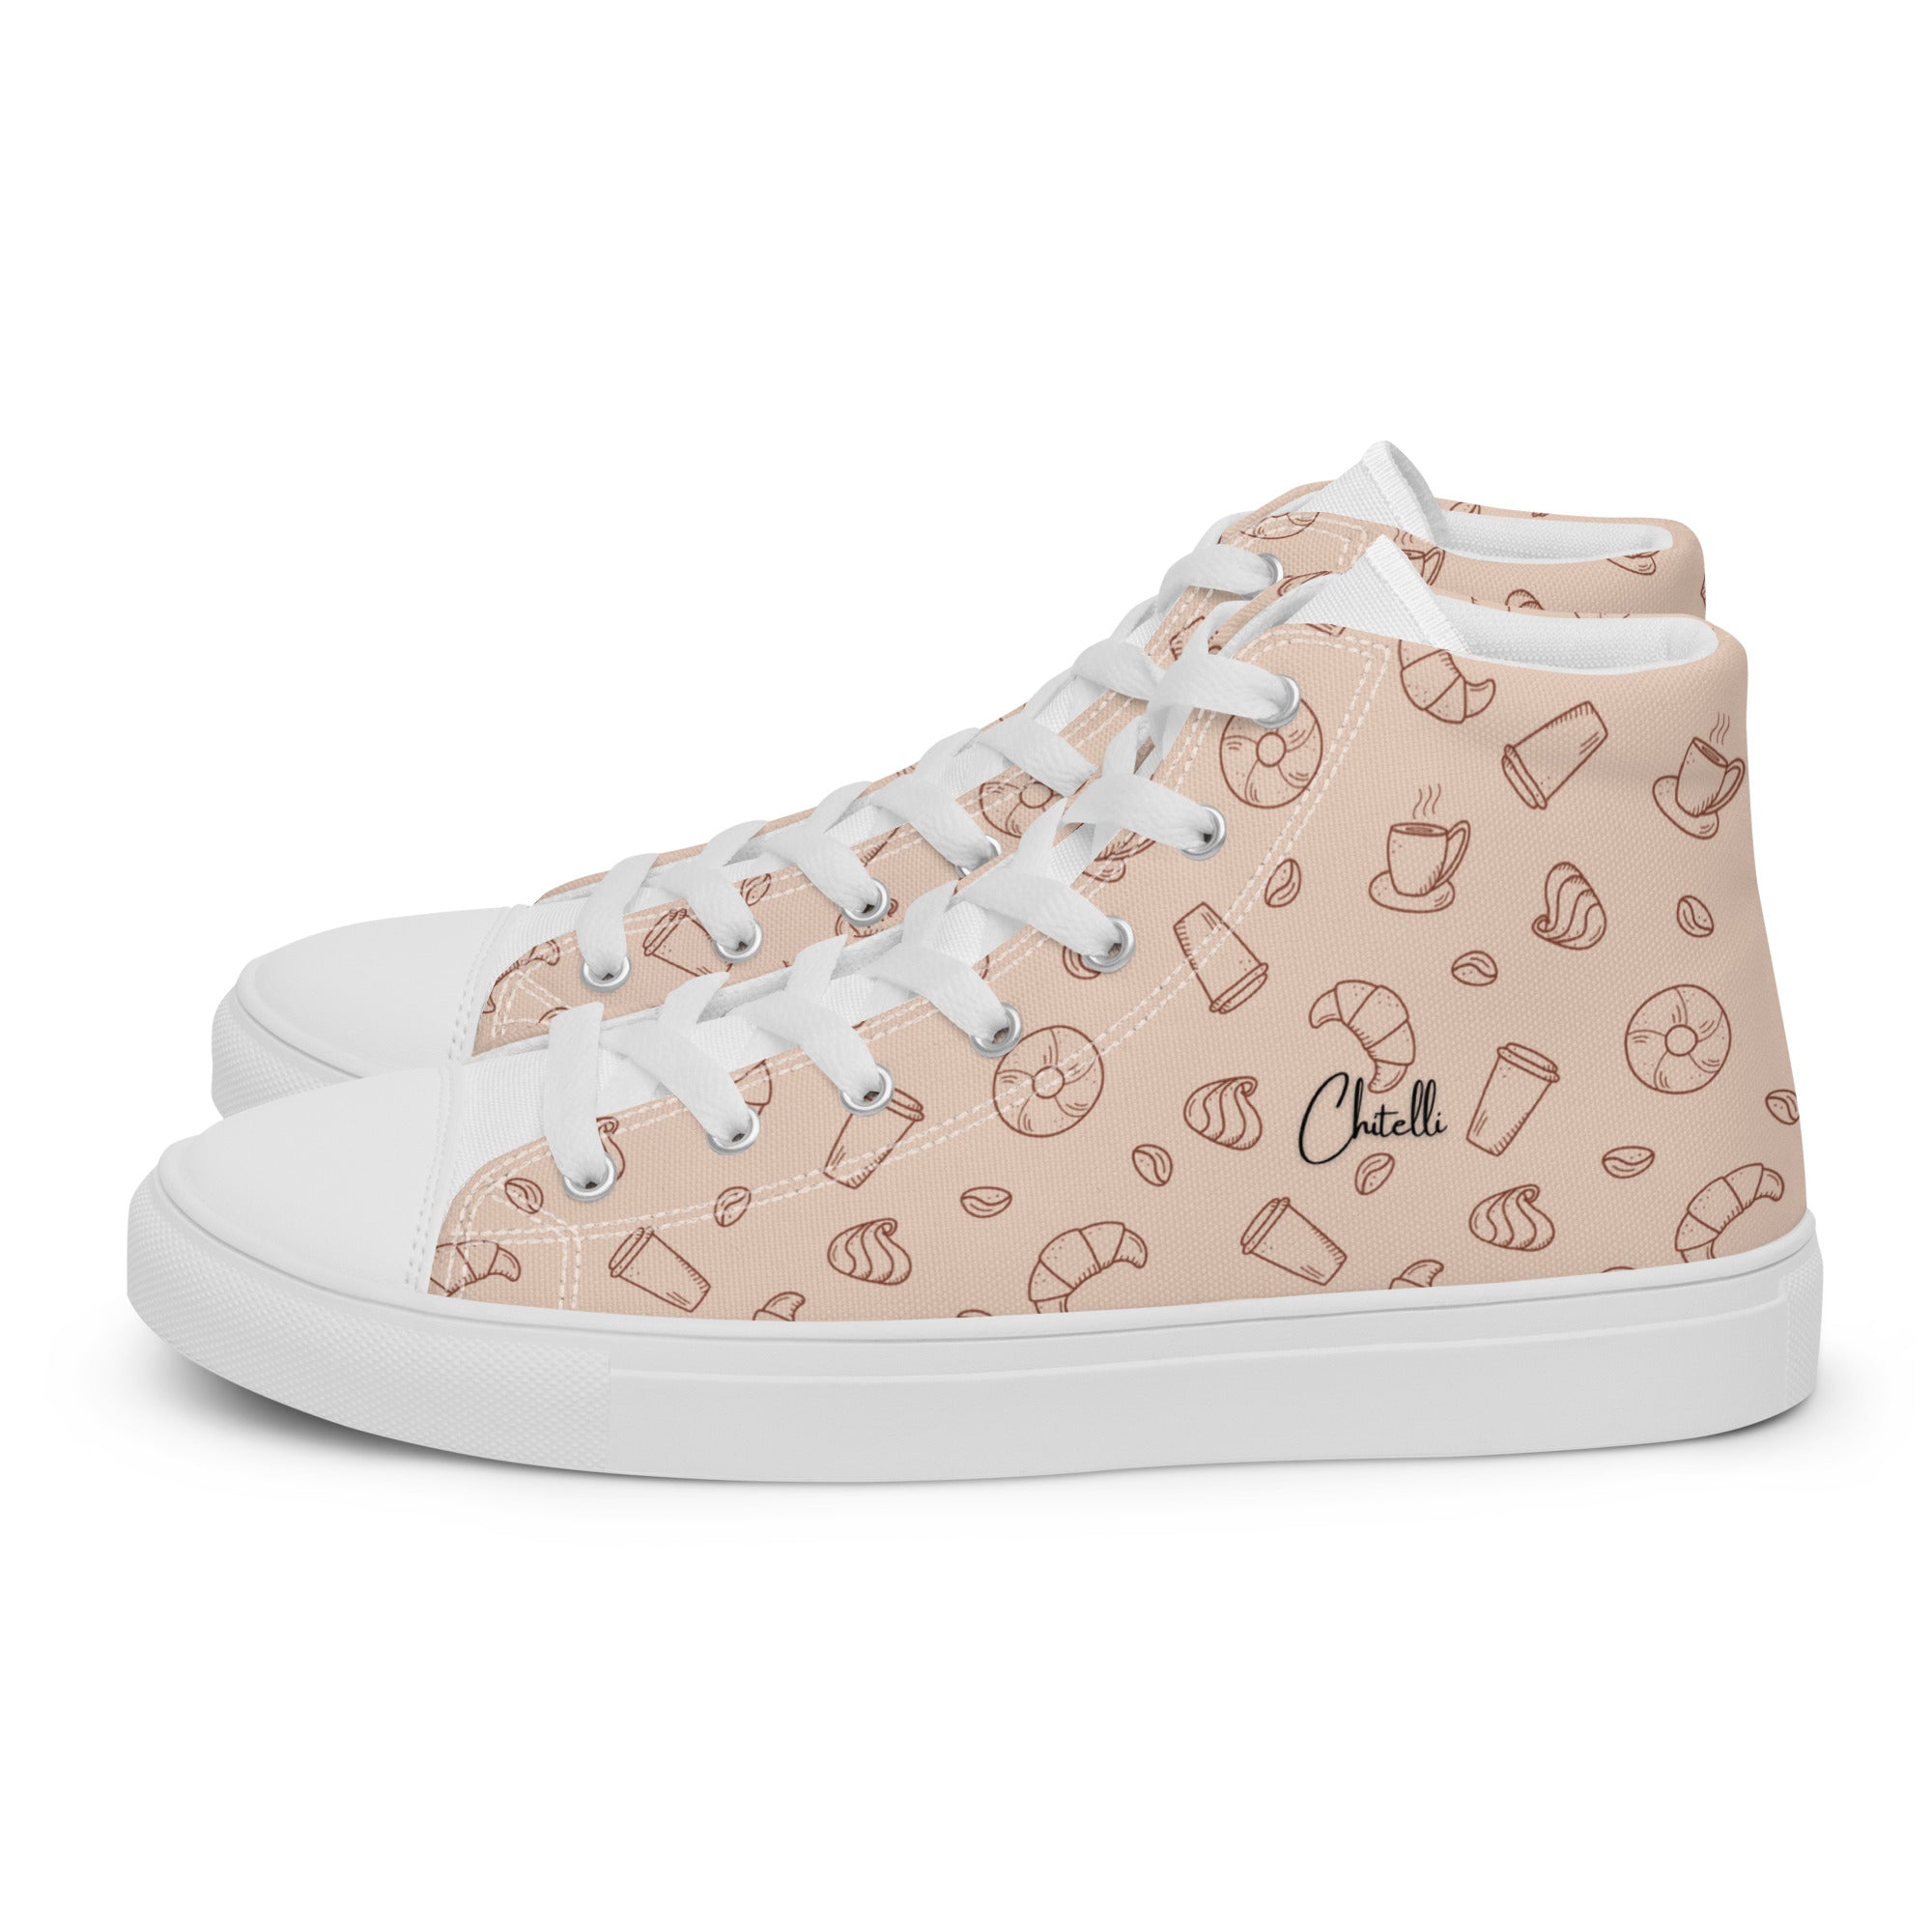 Chitelli's Coffee & Pastries Women's High Top Shoes